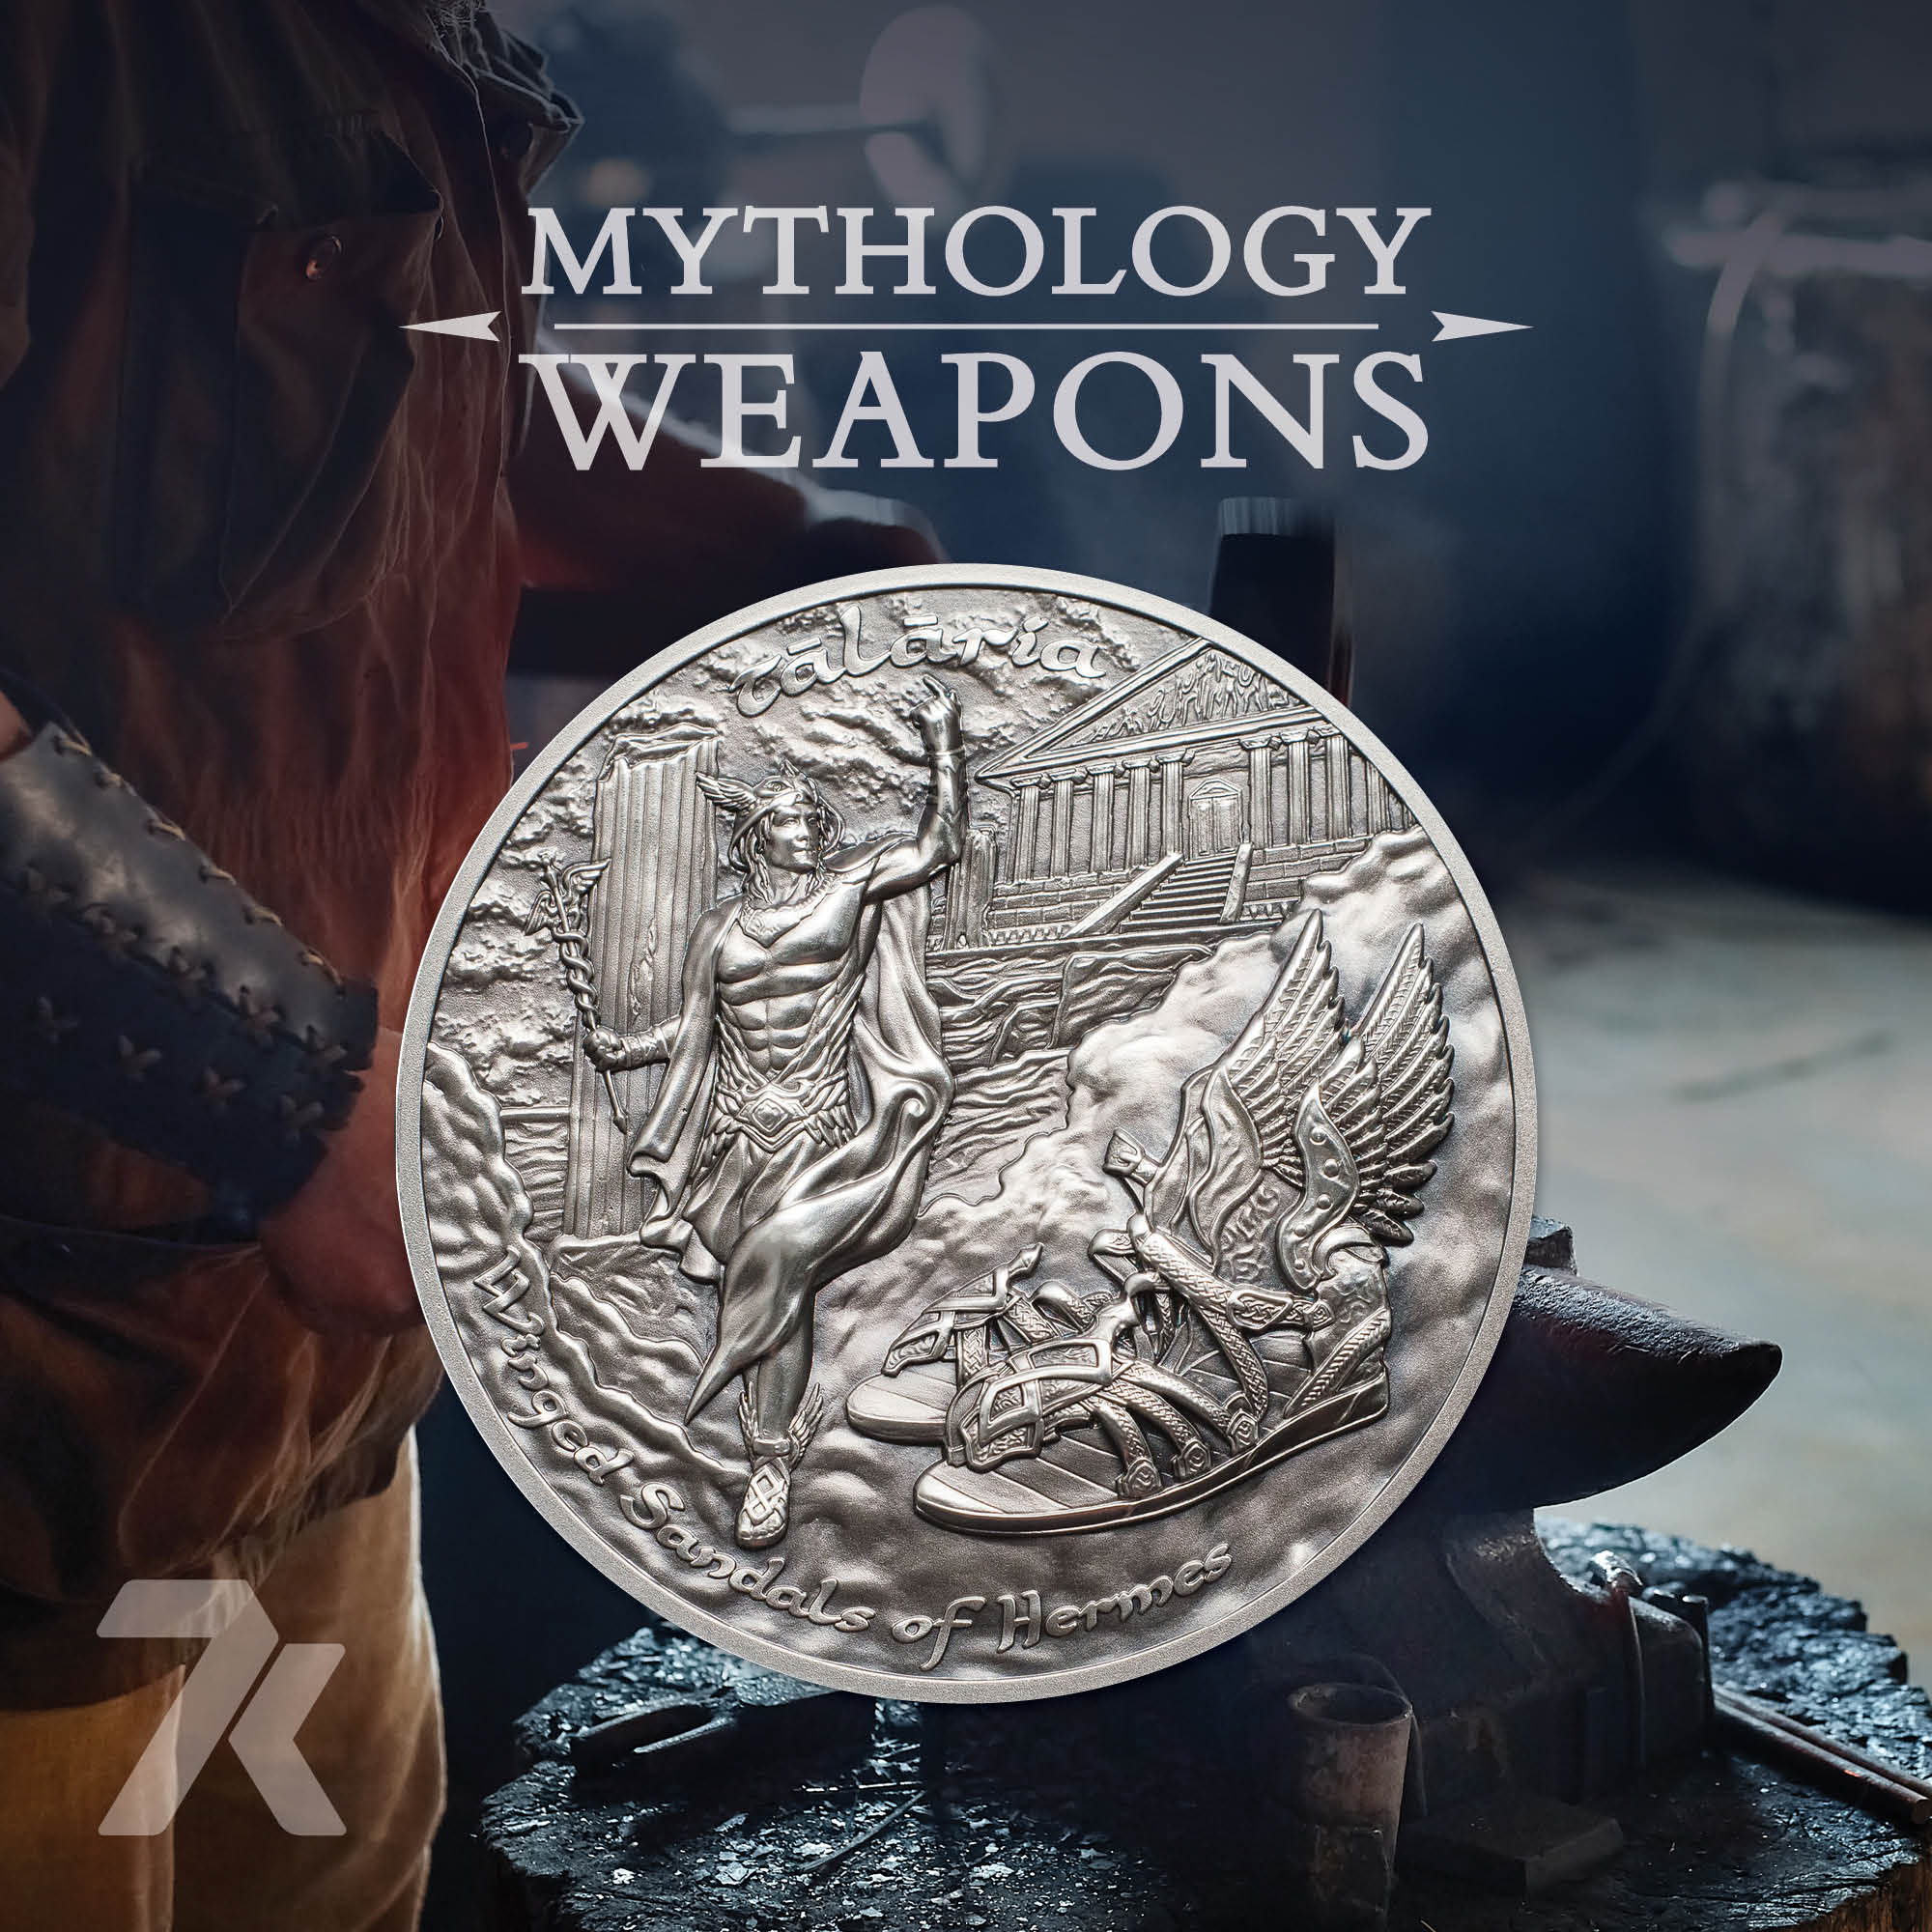 2019 Mythology Weapons Winged Sandals of Hermes 2 oz Silver Coin